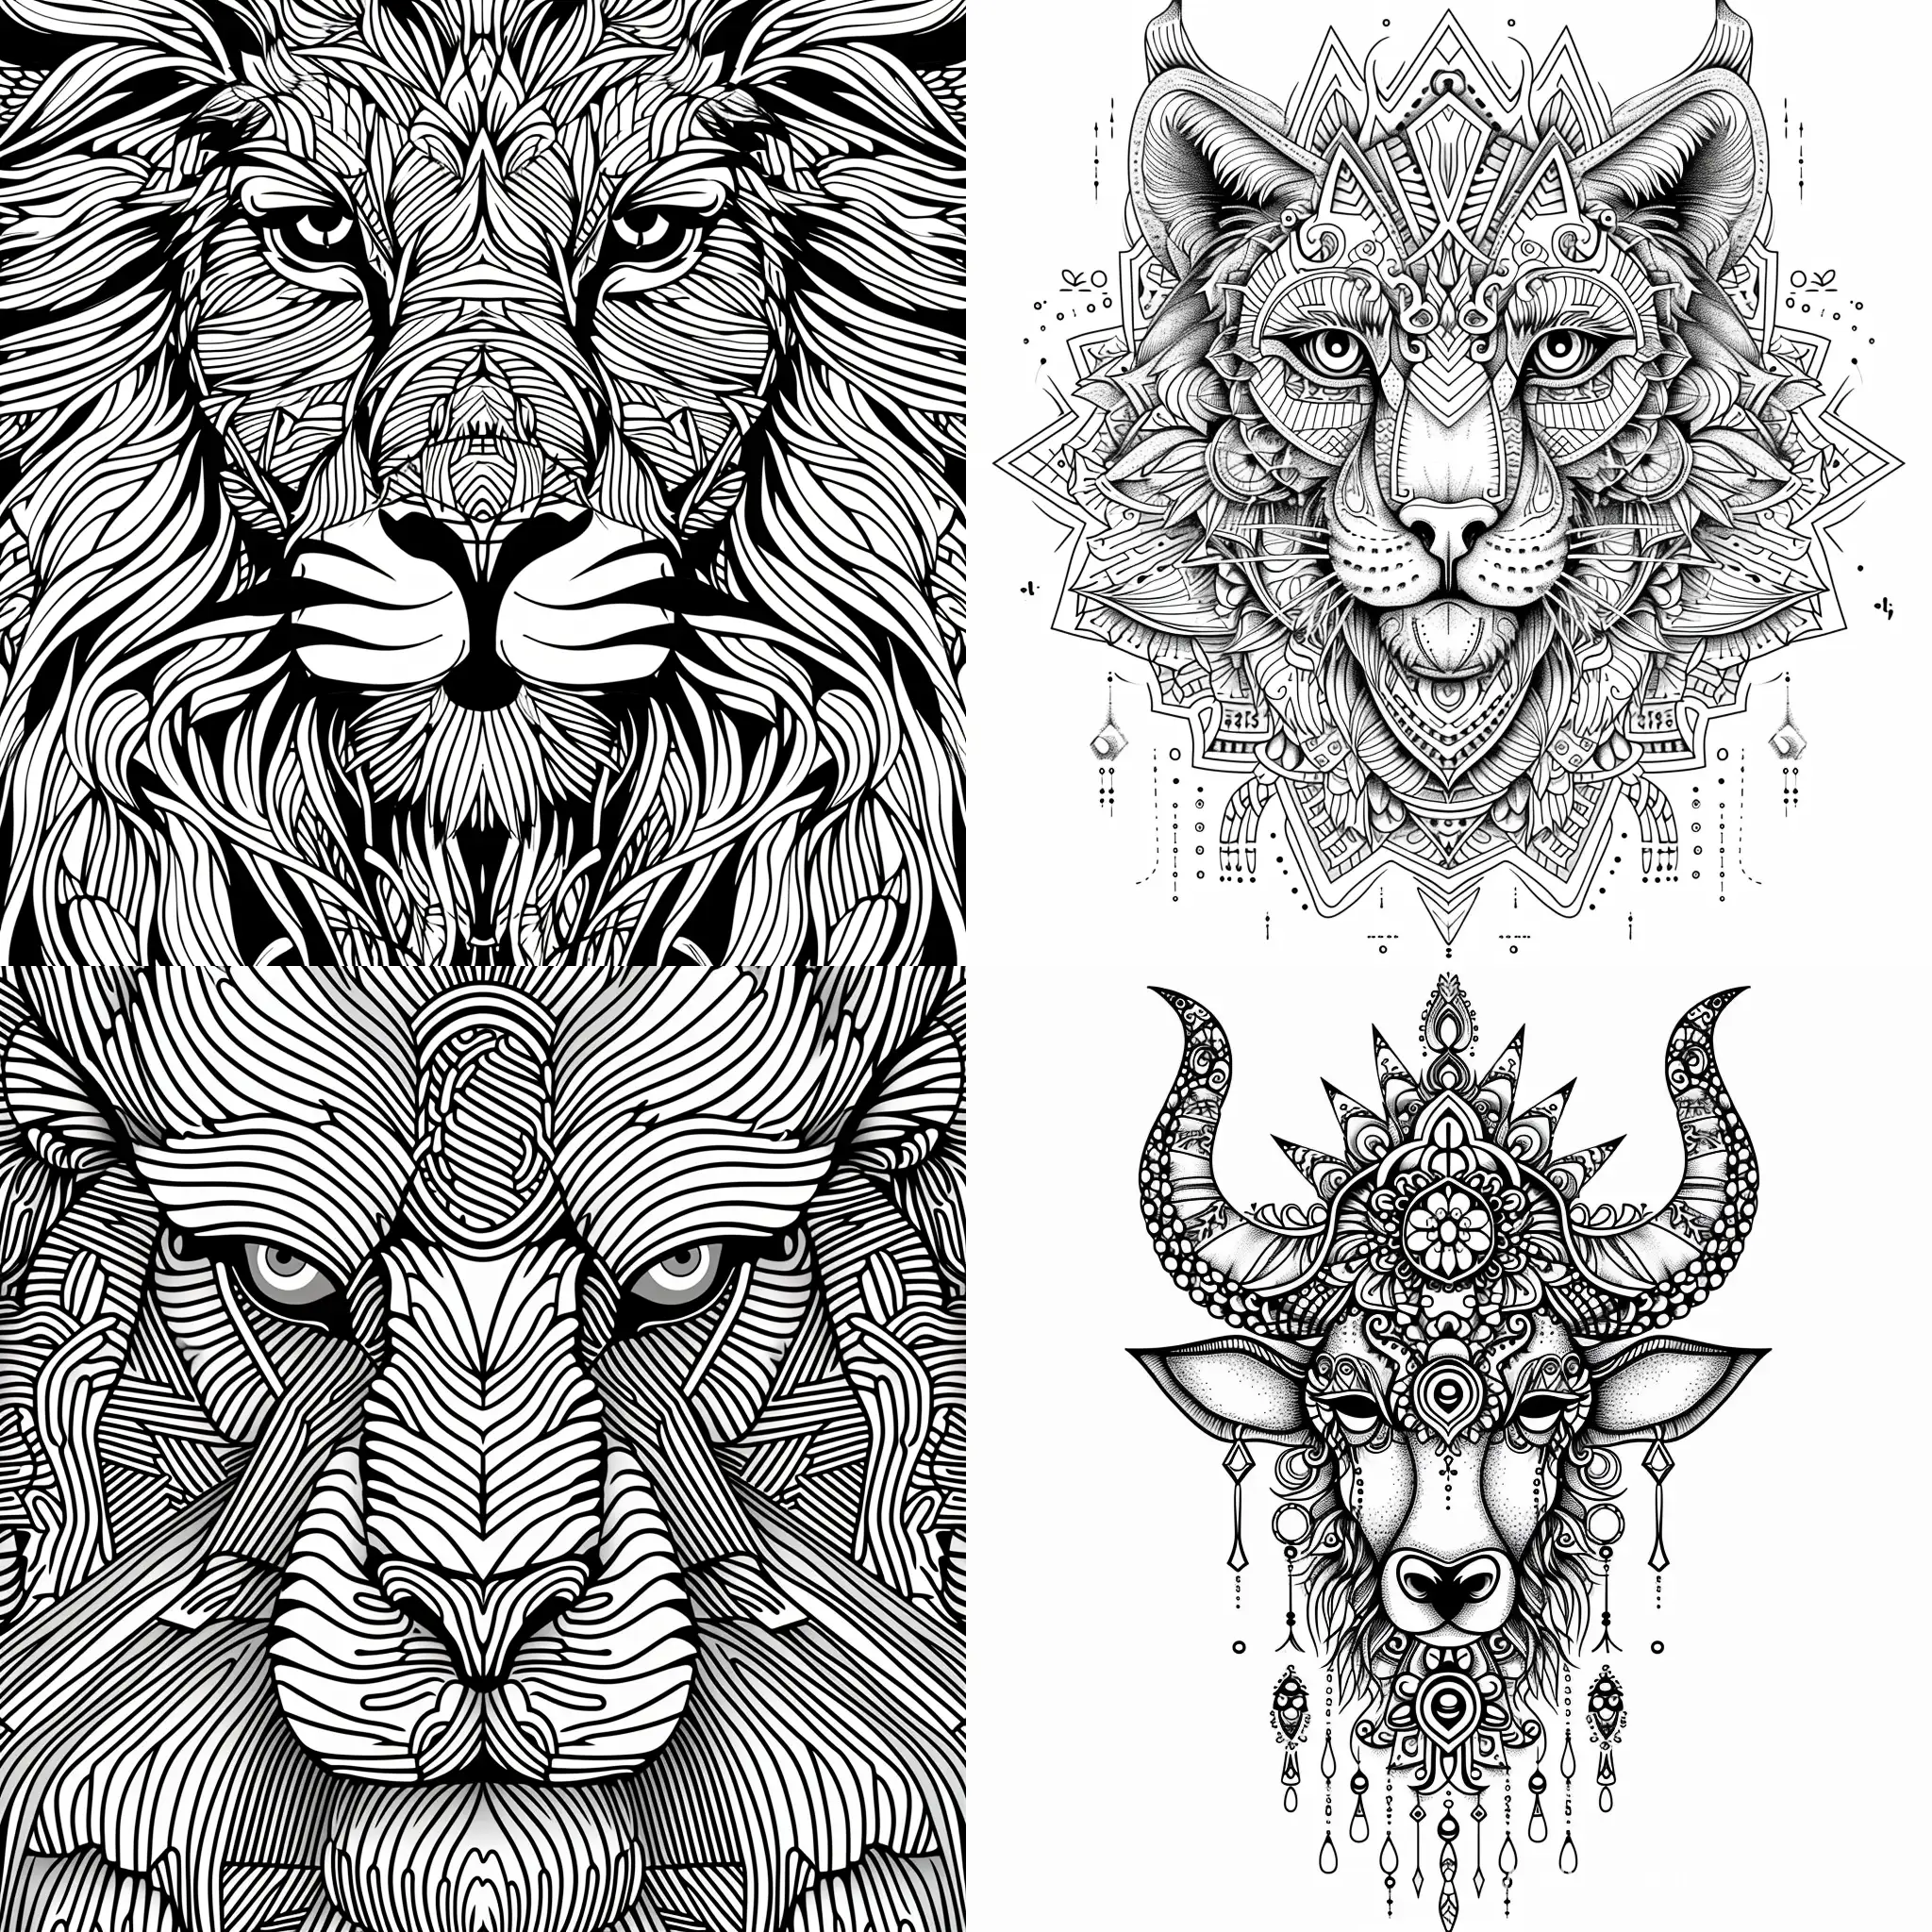 Vector Line Art Illustrations with Detailed Patterns & Geometric Shapes, no faces, no animals